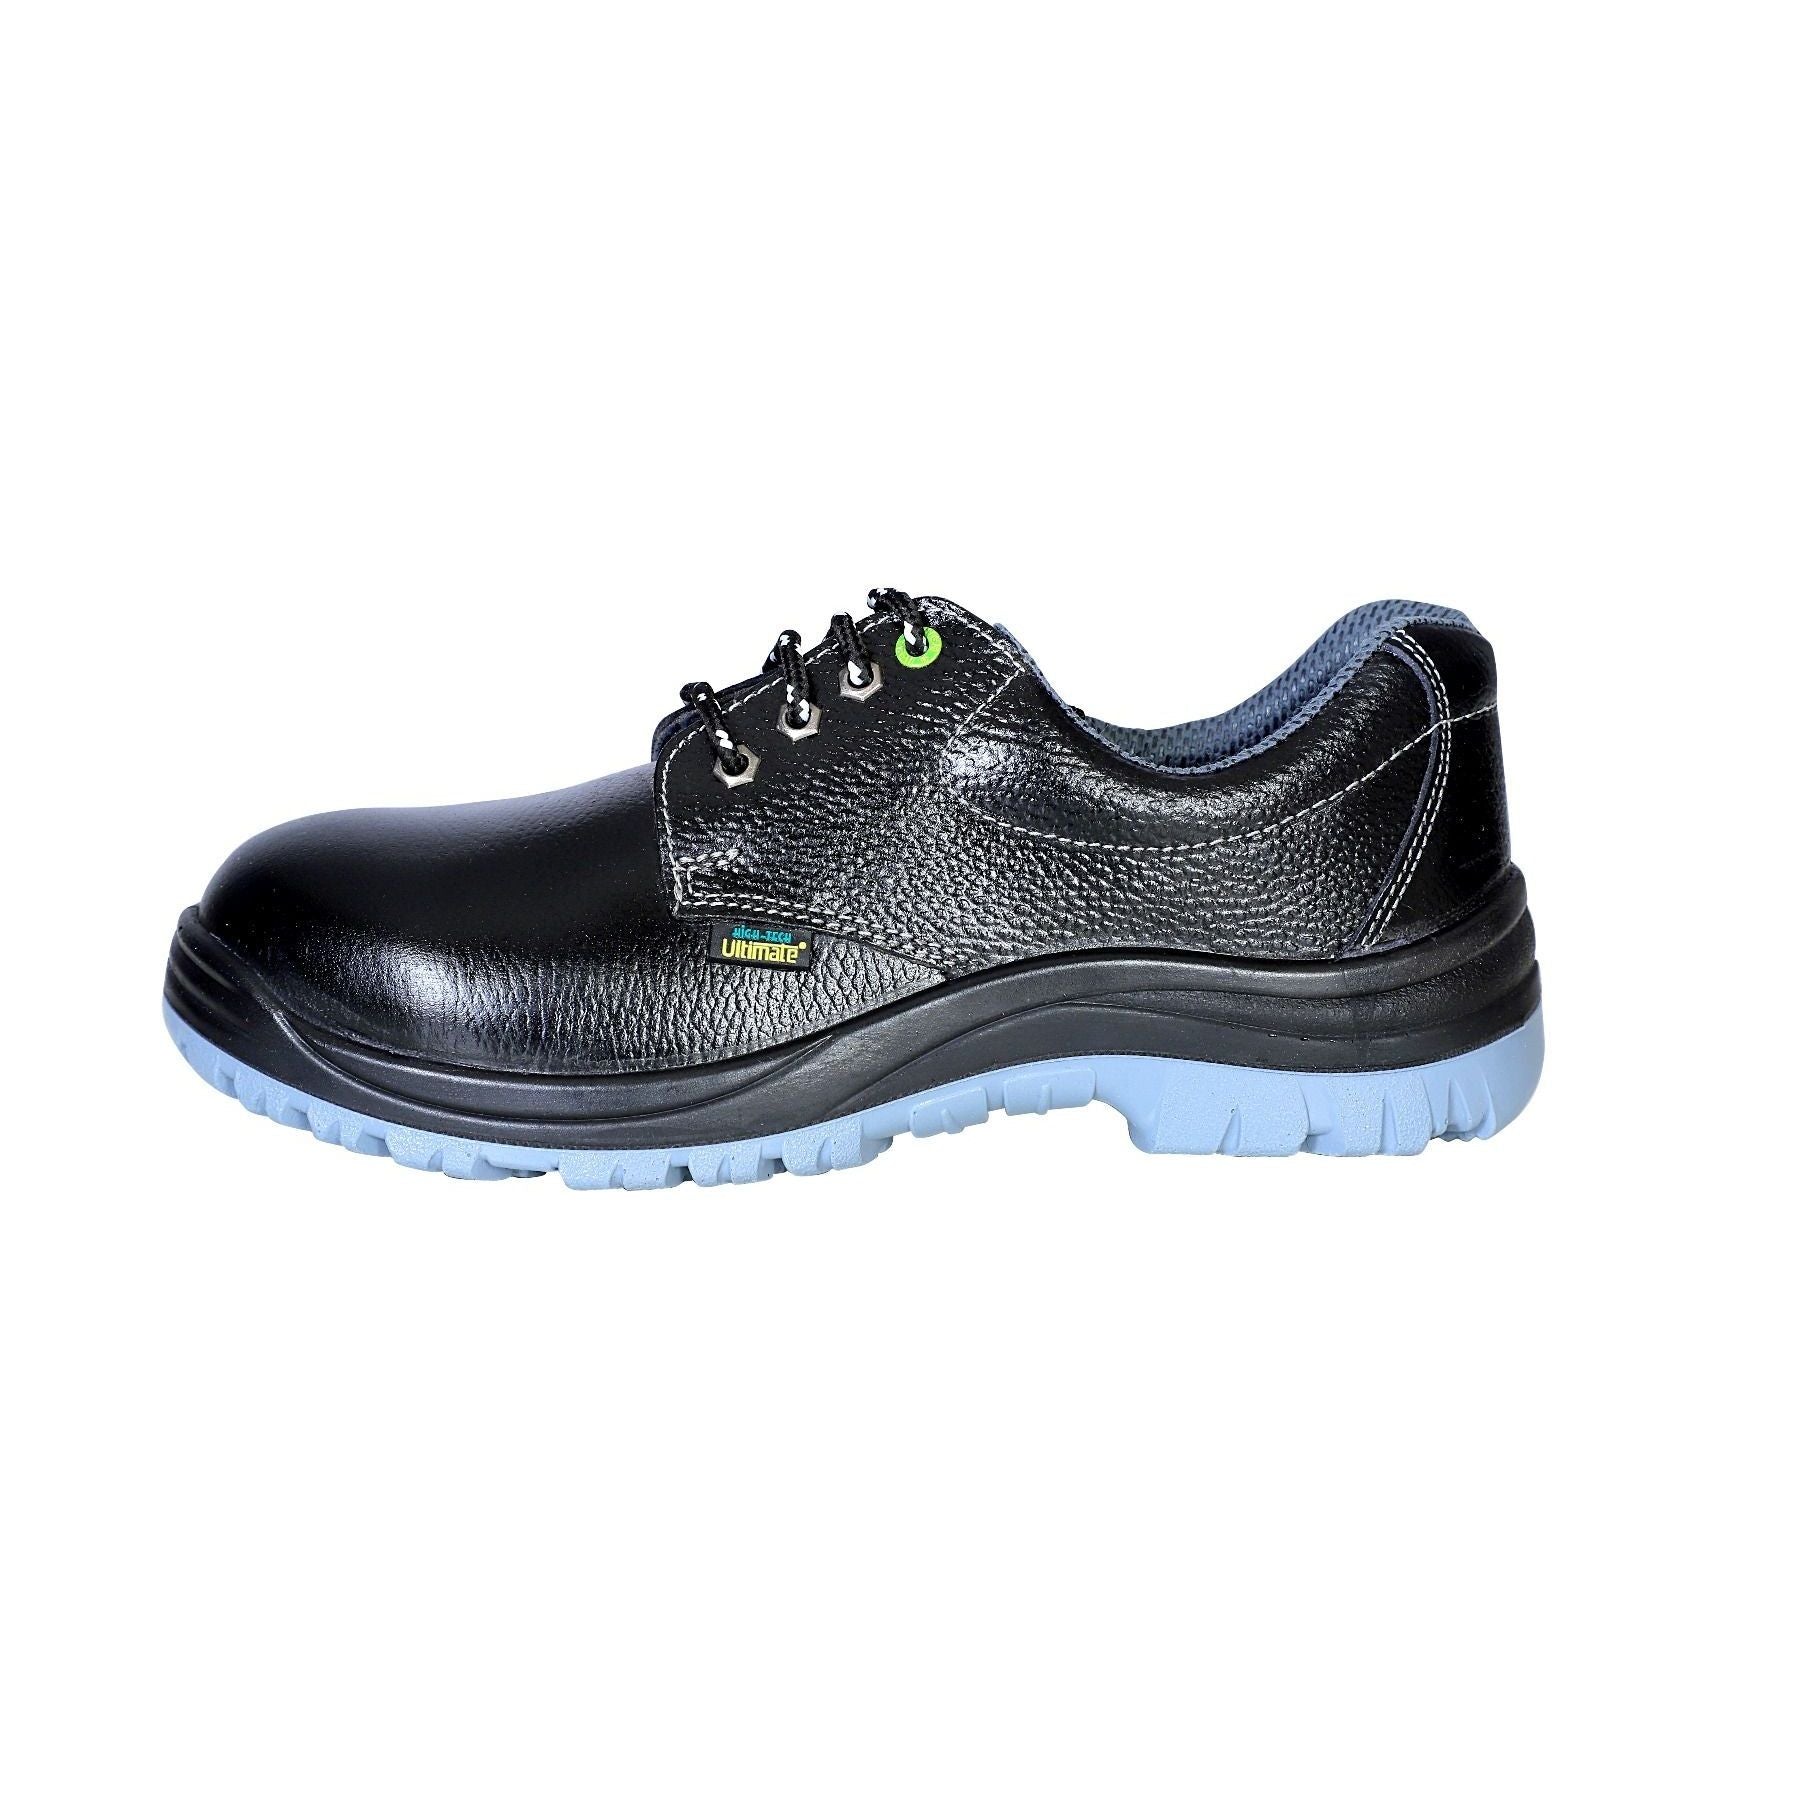 High Tech Genuine Leather Grey Safety Shoes HT-802